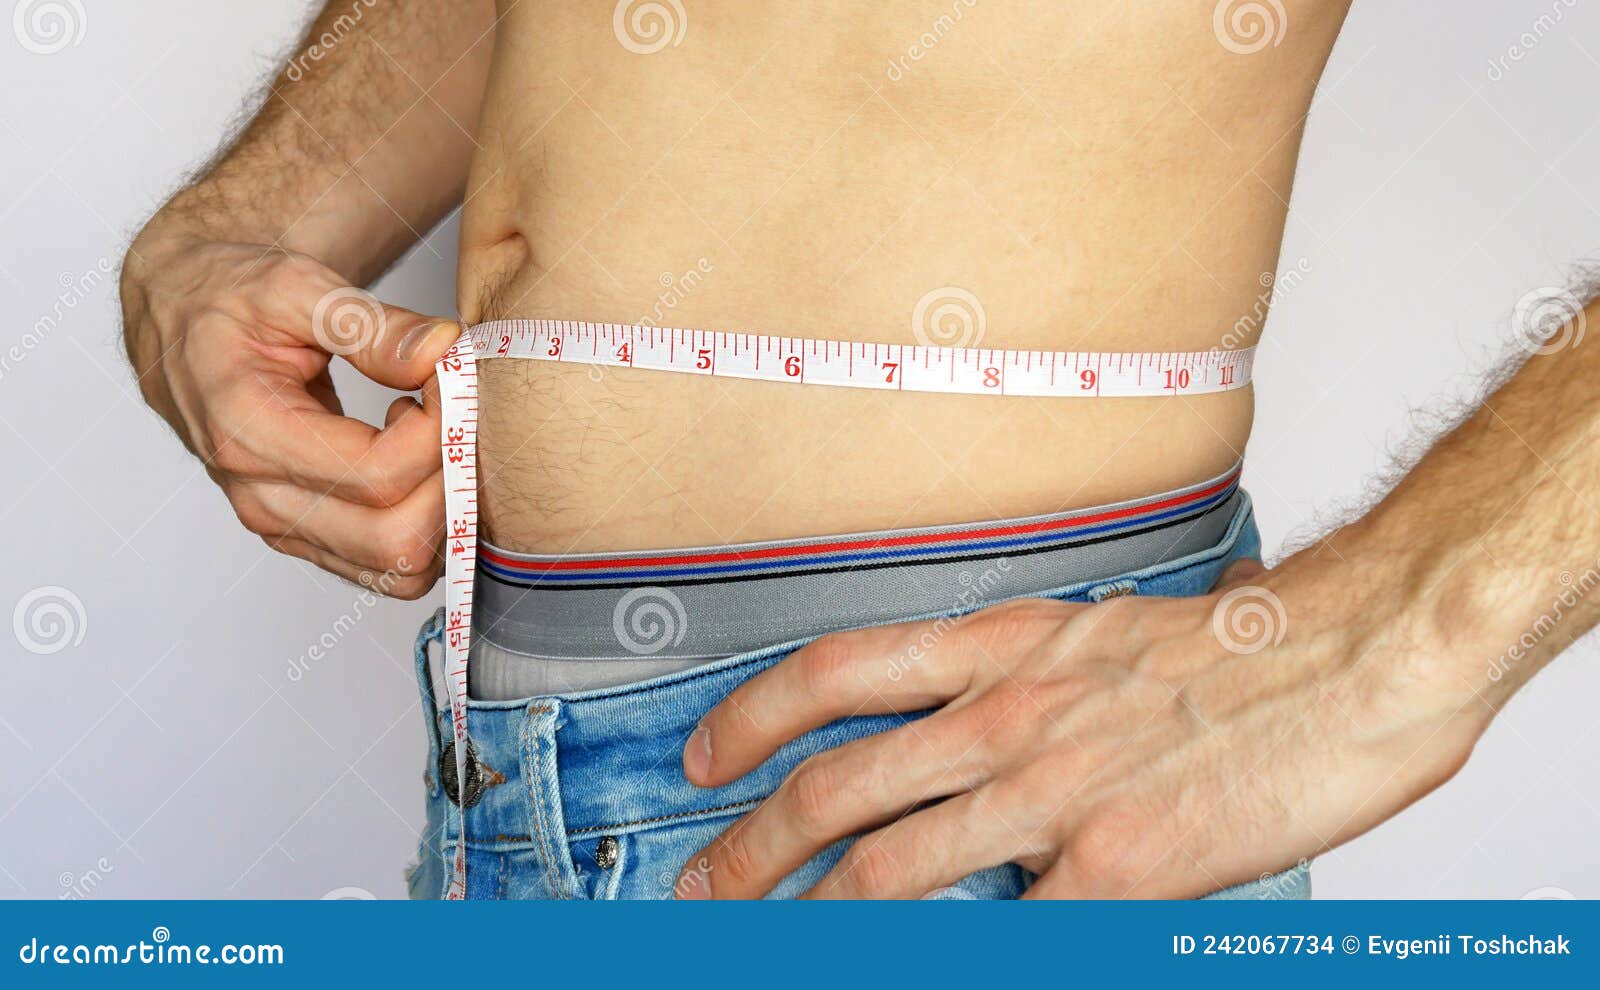 https://thumbs.dreamstime.com/z/close-up-young-man-blue-jeans-measures-waist-against-white-background-young-man-blue-jeans-measures-his-waist-242067734.jpg